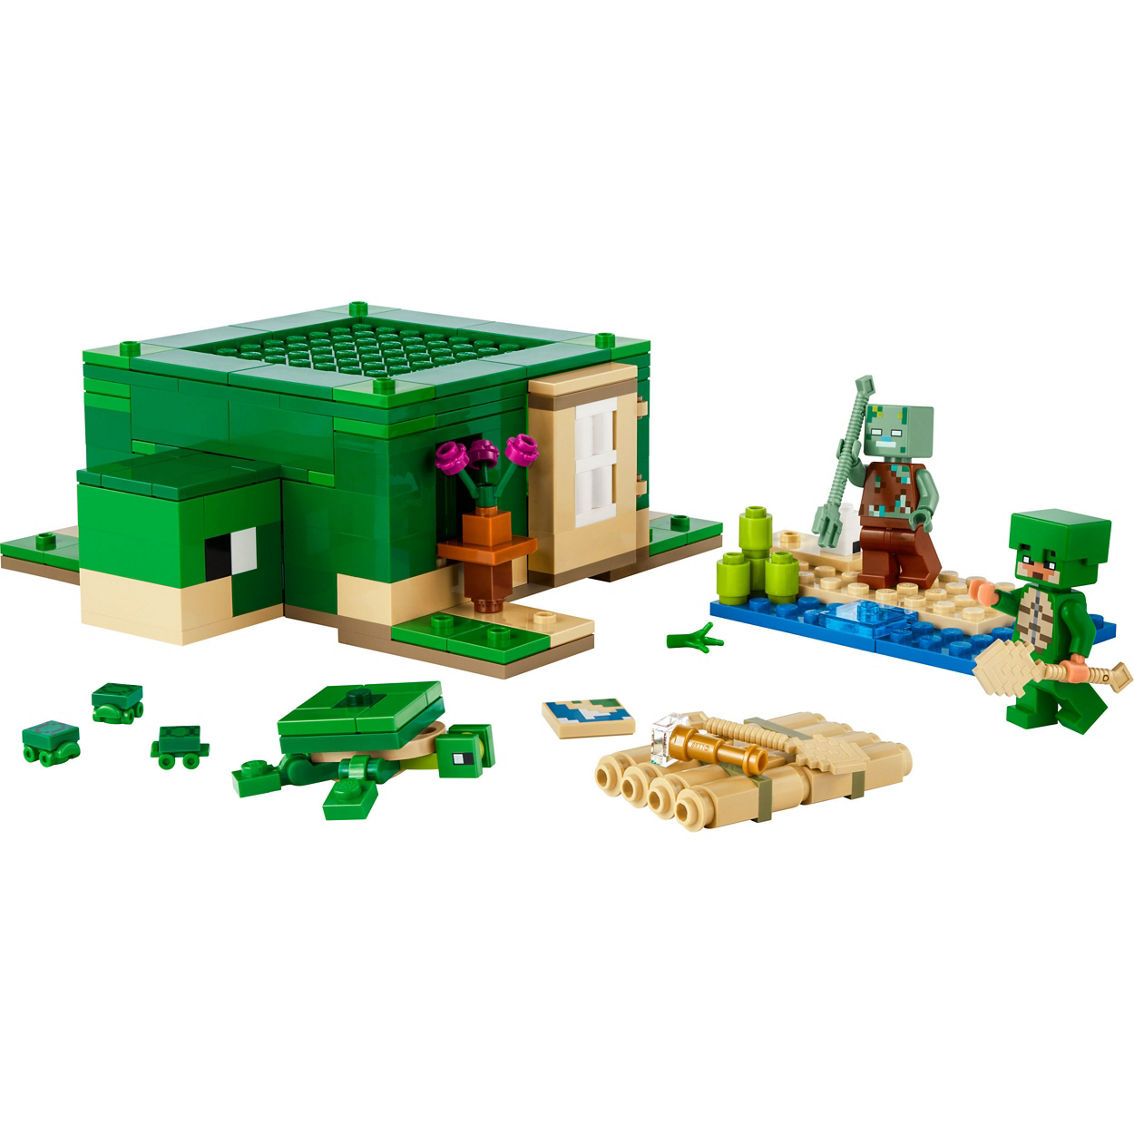 LEGO Minecraft The Turtle Beach House 21254 - Image 4 of 10